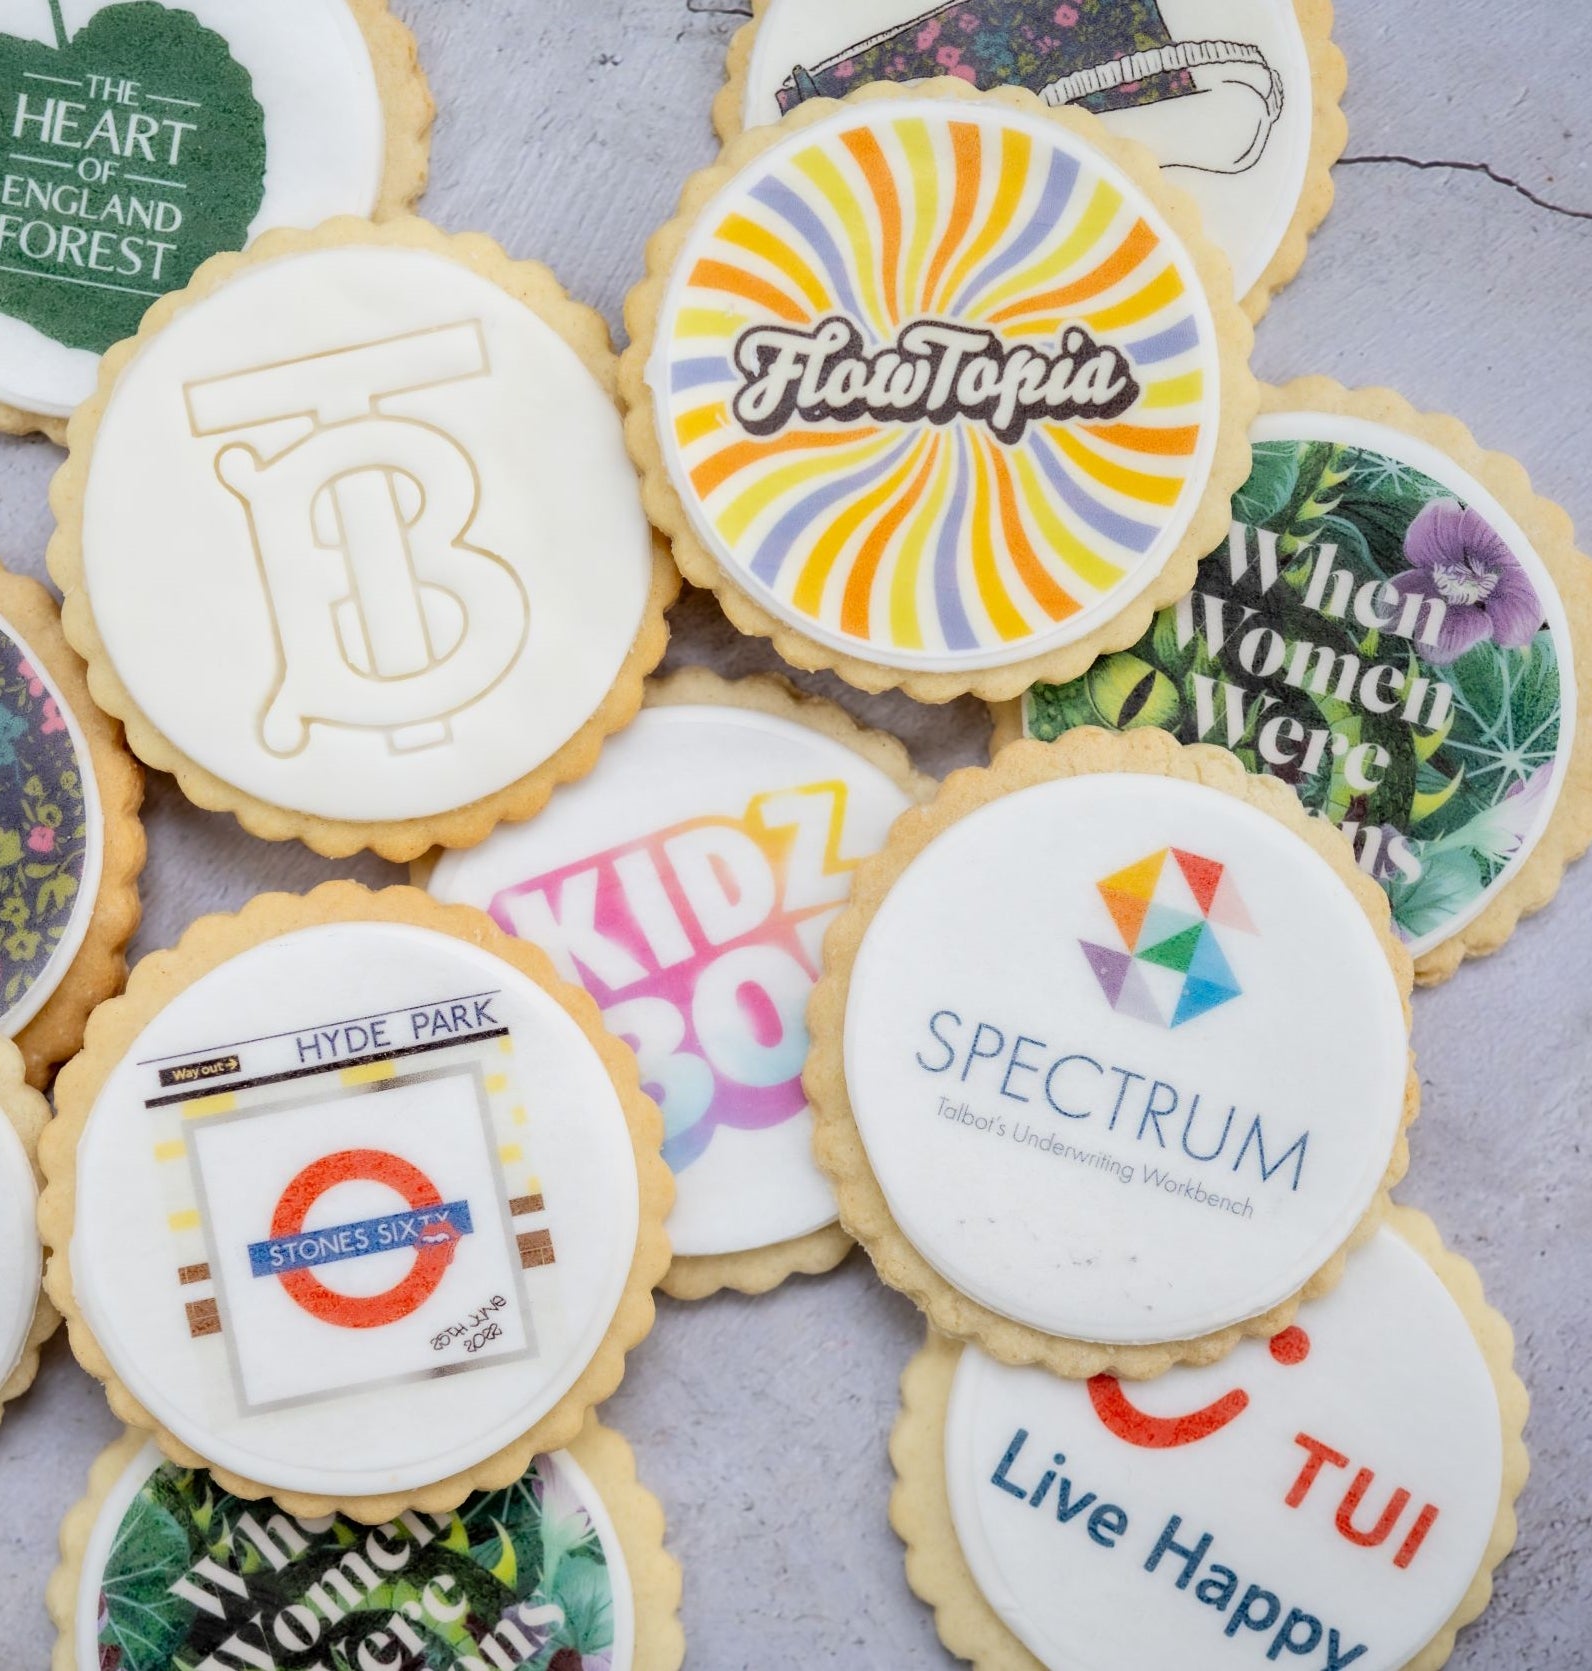 A variety of branded biscuits handmade by The Biskery